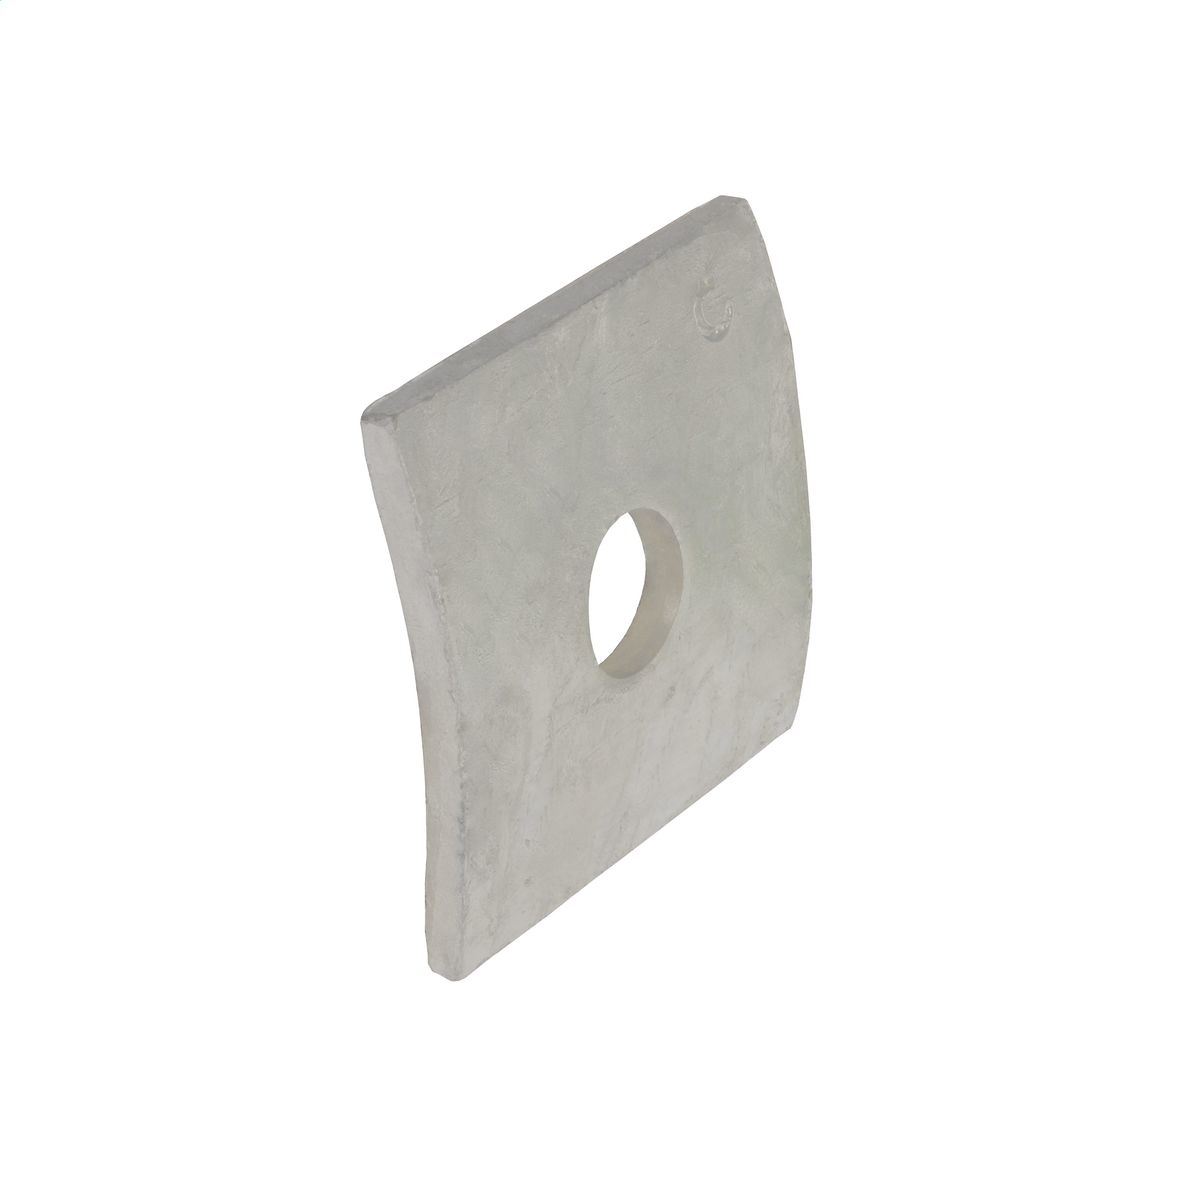 Stainless Steel Square Flat Washer /Round Washer